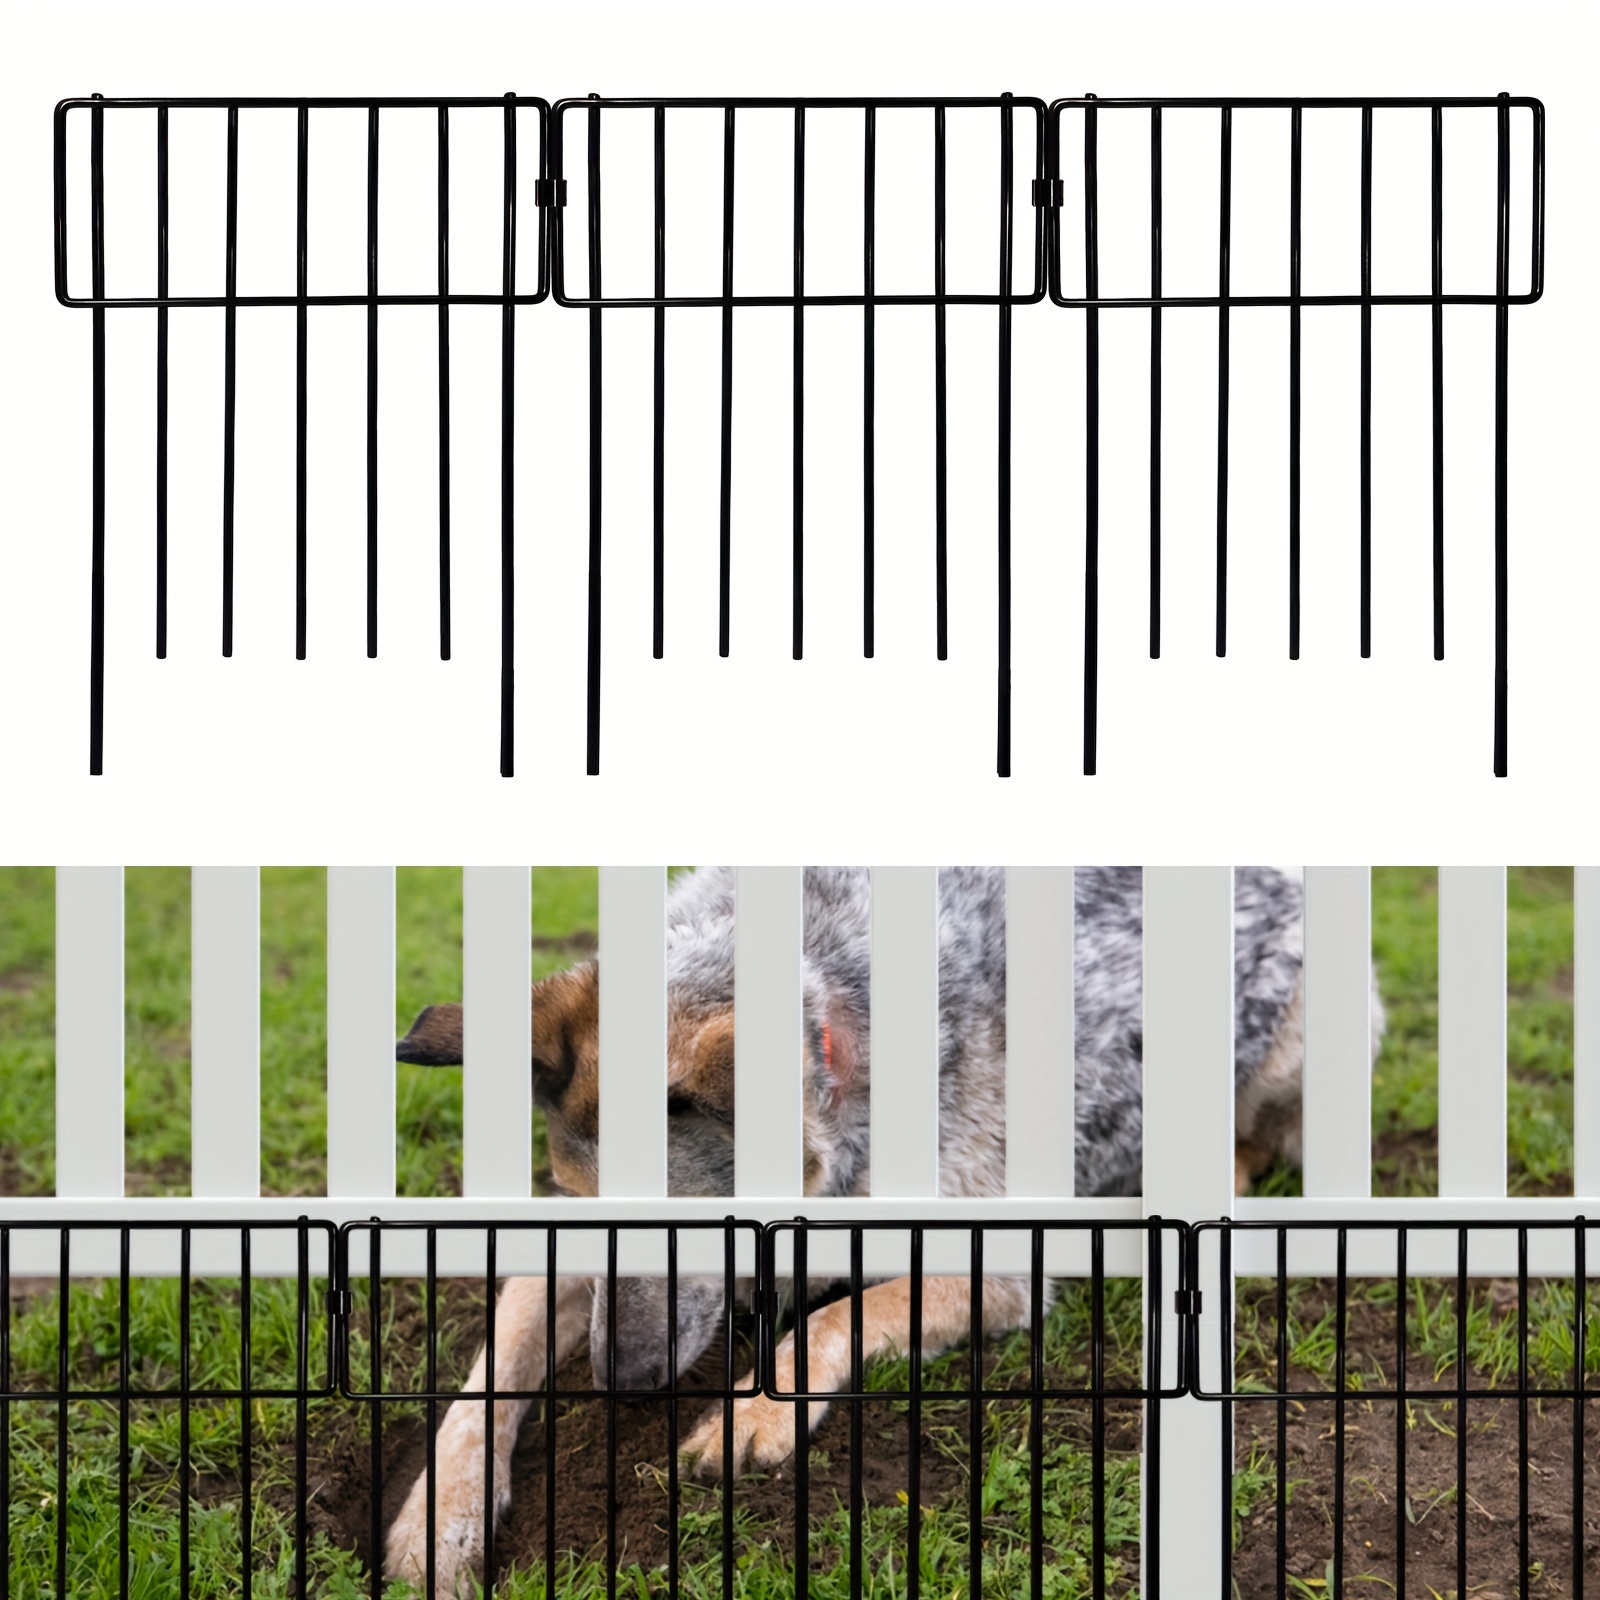 

Garden Fence Animal Barrier Fence 10pack, 17inx10ft No Dig Fence For Dogs Rabbits, Rustproof Metal Wire Garden Border Small Fence Panels For Yard Patio Decor